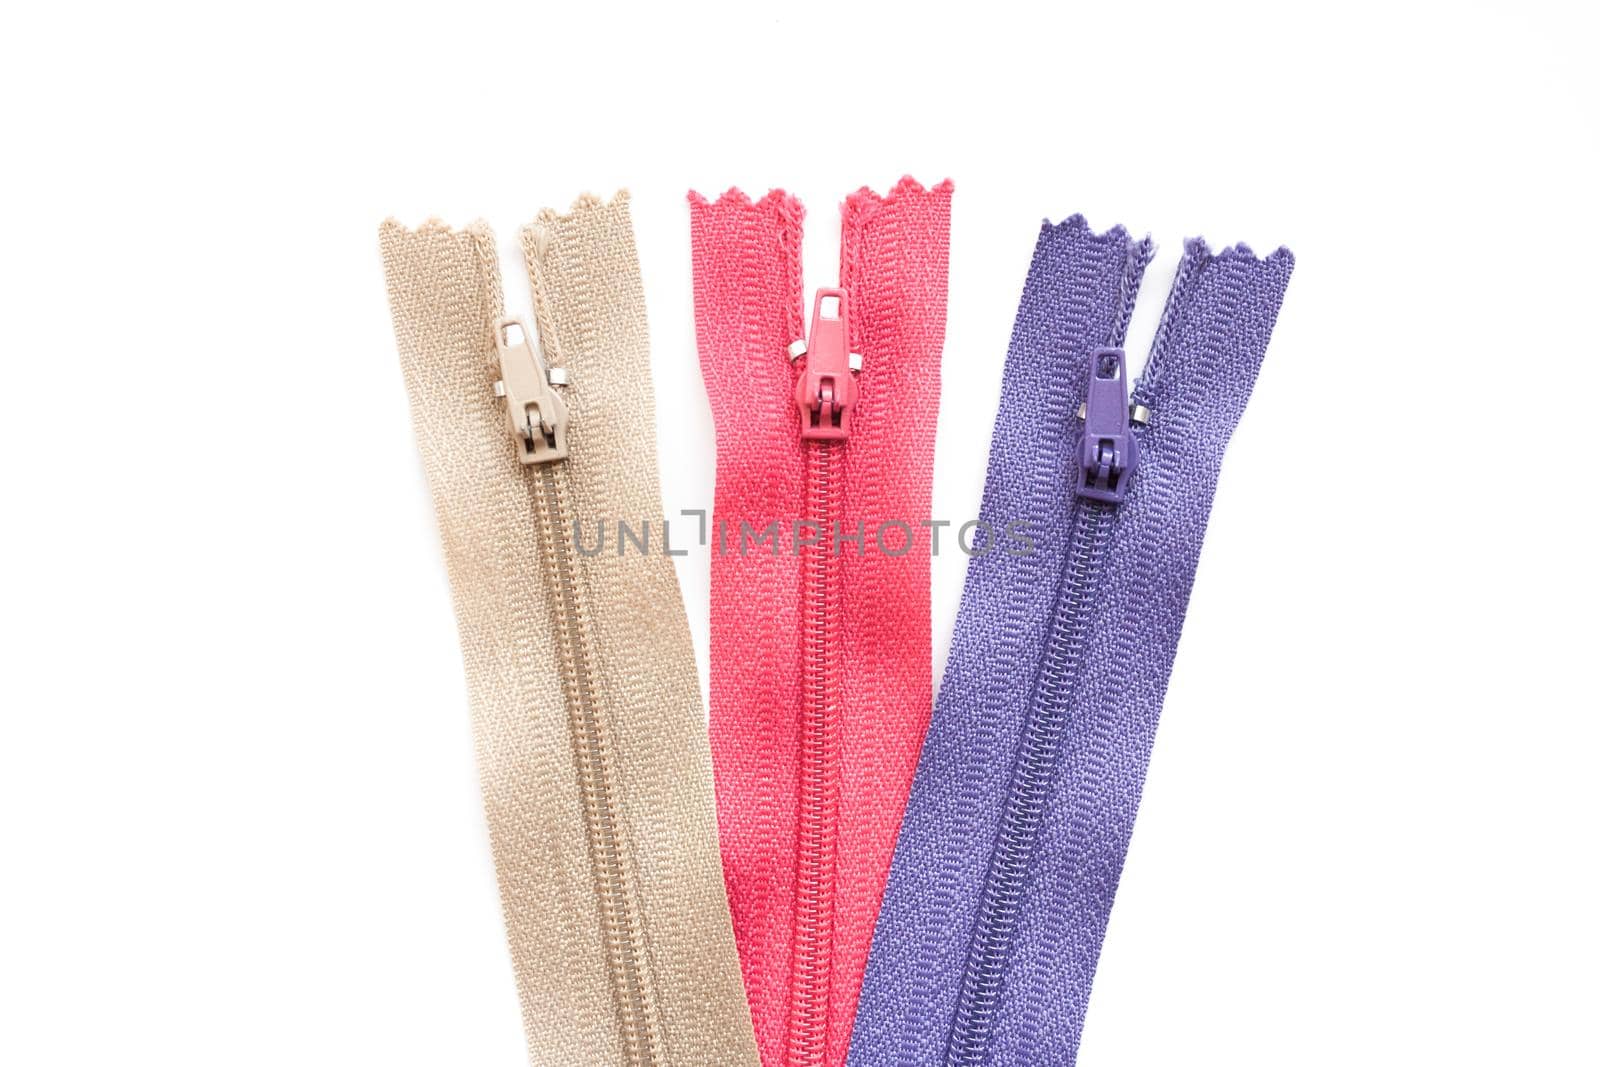 Zipper collection isolated on white background. Clothing fastener colorful set by ingalinder